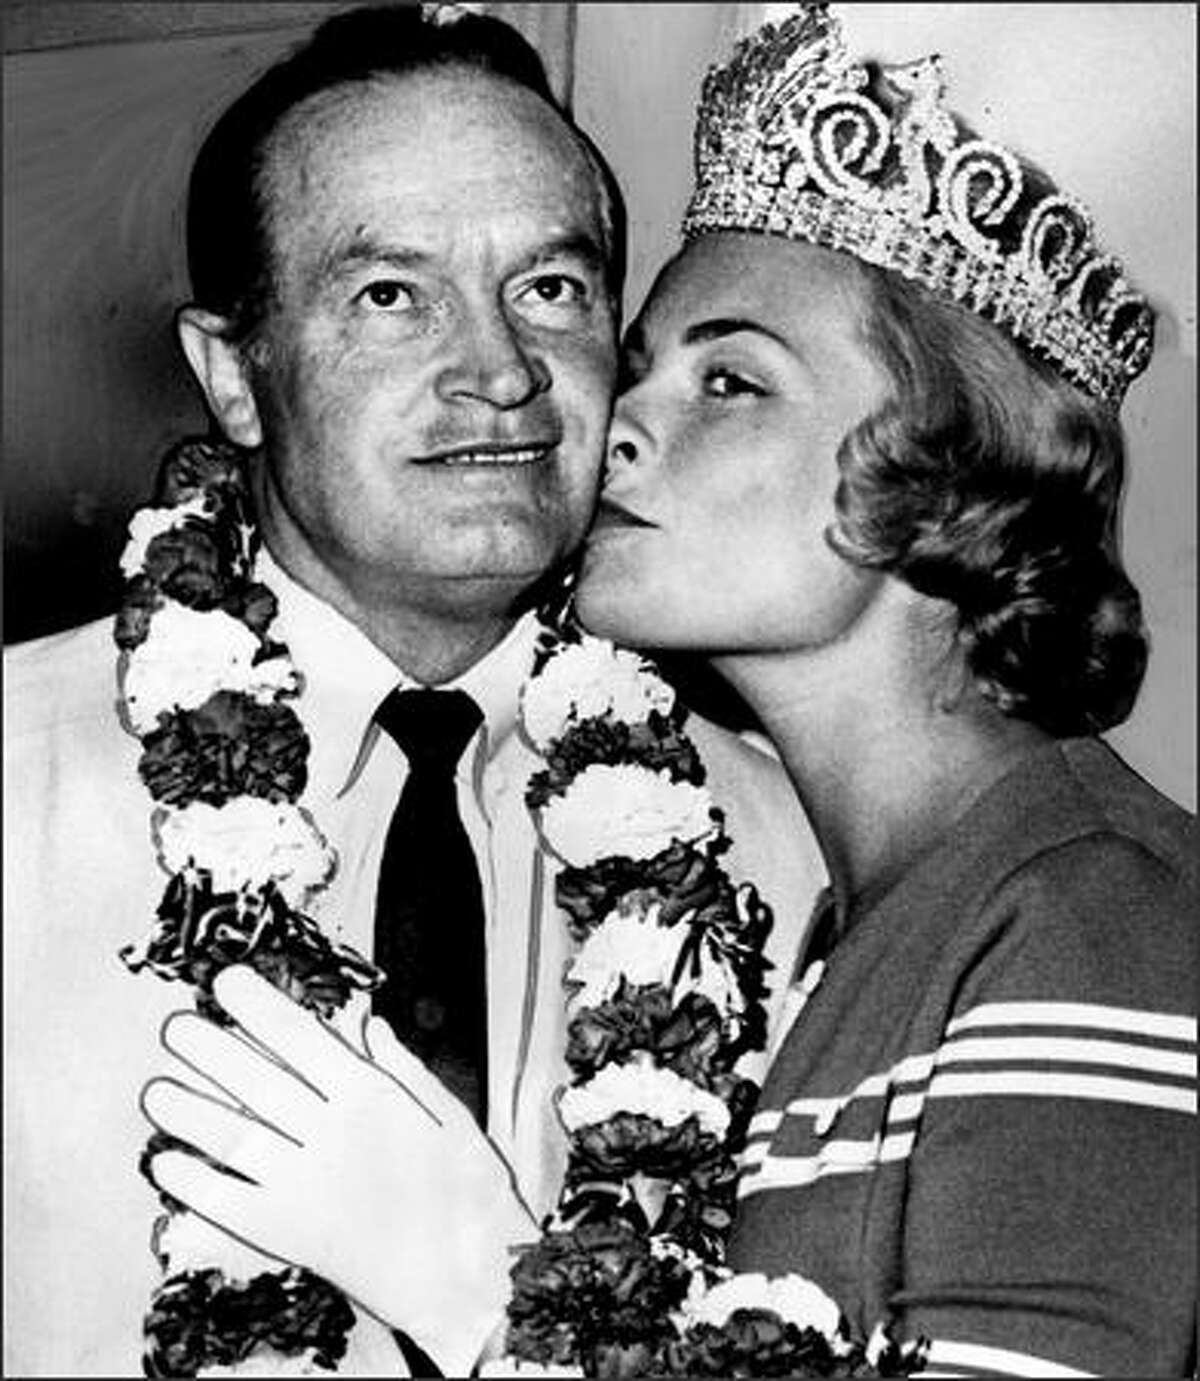 After the 1962 World's Fair put Seattle on the map, celebrities doing shows here often took part in Seafair. In 1963, Bob Hope was bussed by Seafair Queen Arlene Hinderlie and served as honorary grand marshal for the Torchlight Parade.